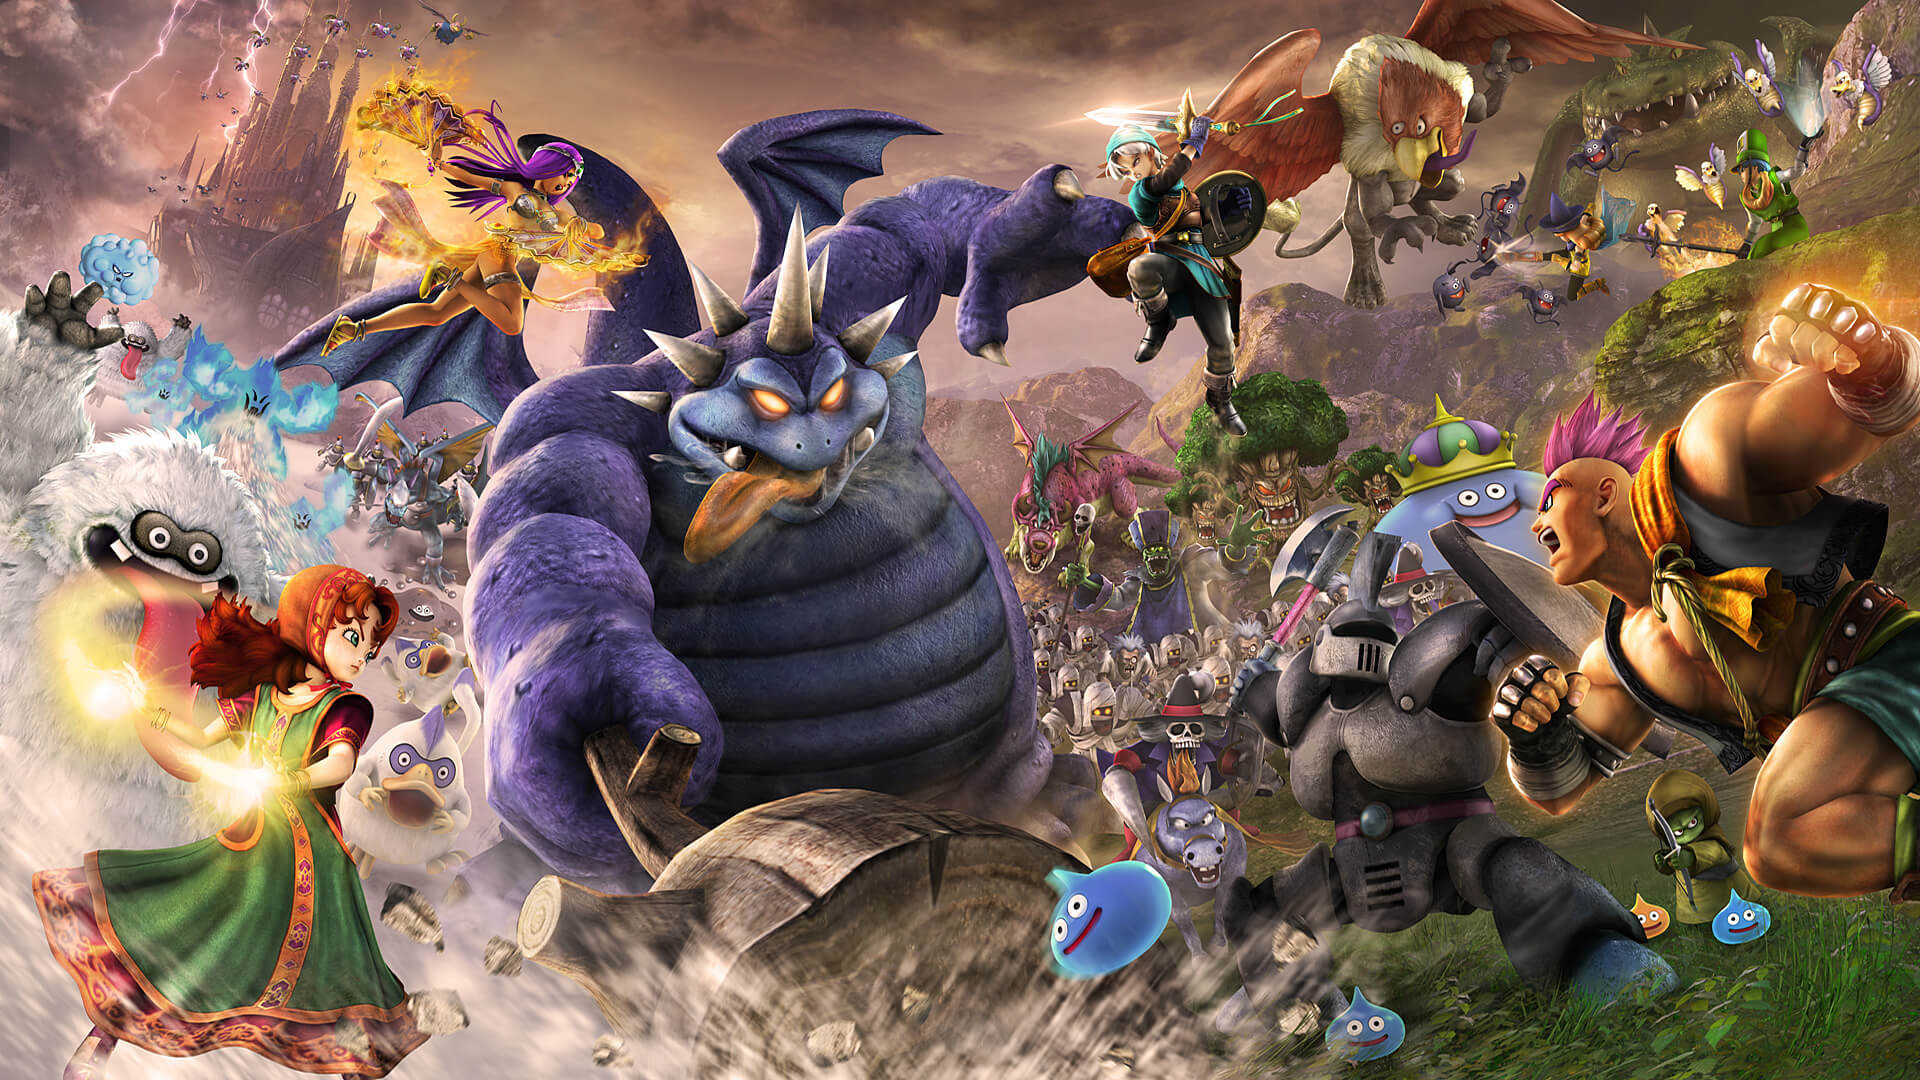 Video Game Dragon Quest Heroes II HD Wallpaper | Background Image